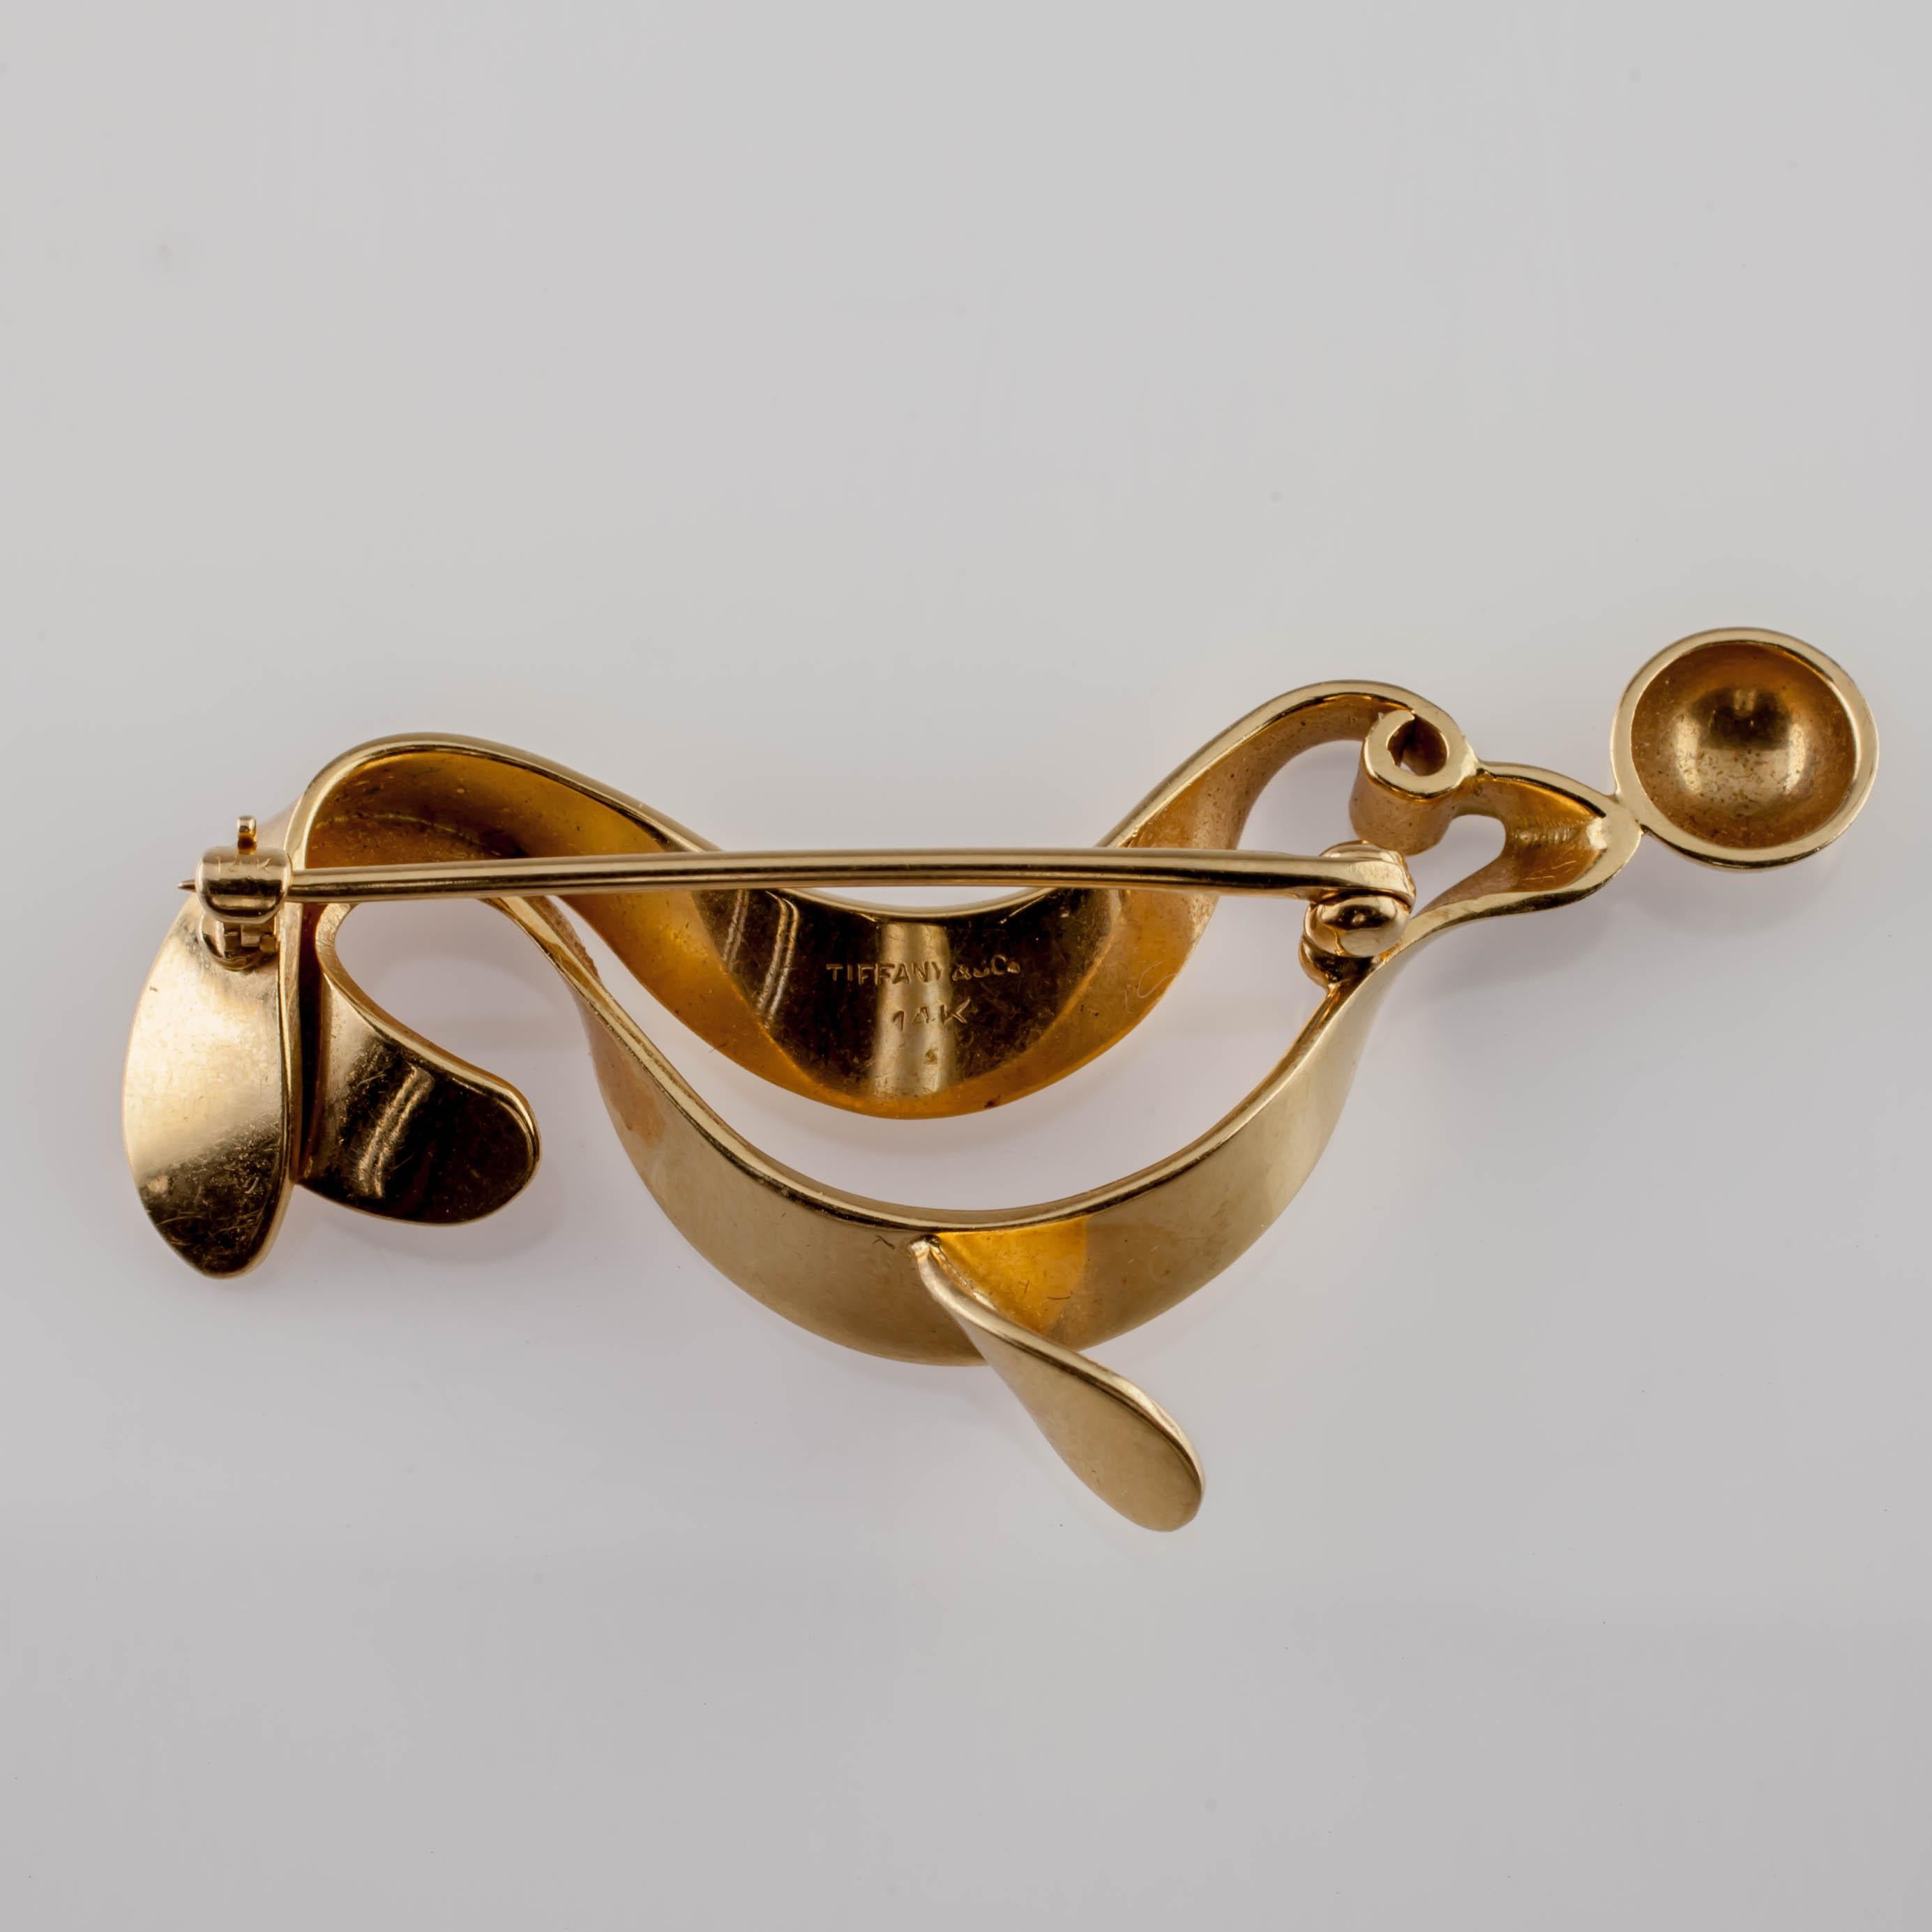 Gorgeous Stylized Ribbon Brooch by Tiffany & Co.
Sea Lion Balancing a Ball
Width of Brooch (Distance Across) = 48 mm
Length of Brooch (Distance from top of head to pectoral fin) = 24 mm
Total Mass = 6.3 grams